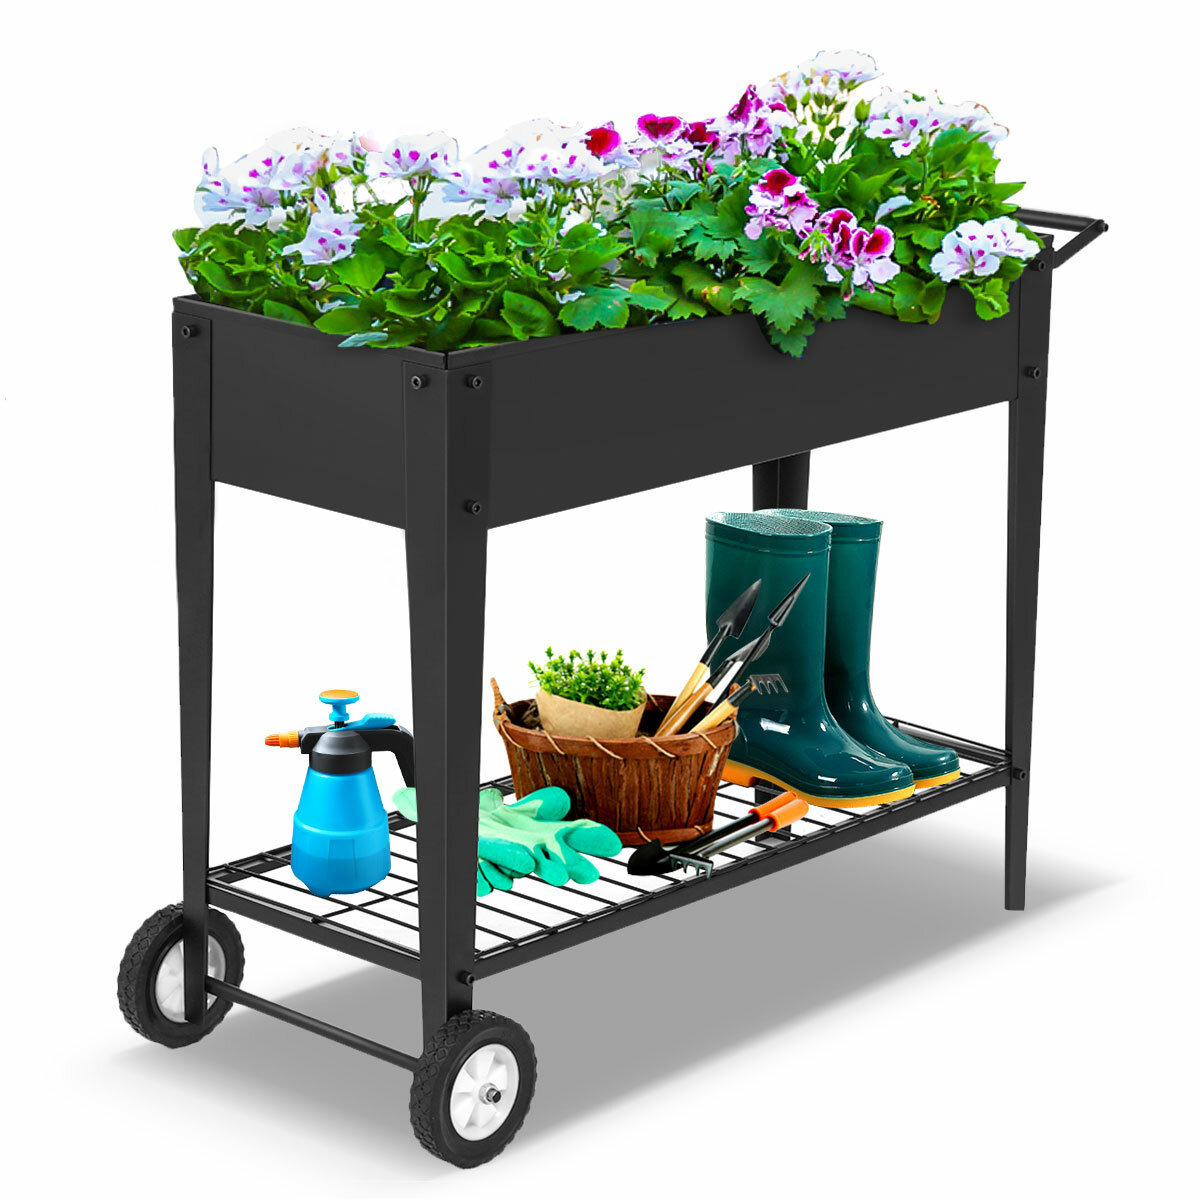 

Raised Garden Bed with Legs Outdoor Raised Planter Box on Wheels Elevated Garden Bed for Vegetable Flower Herb Patio